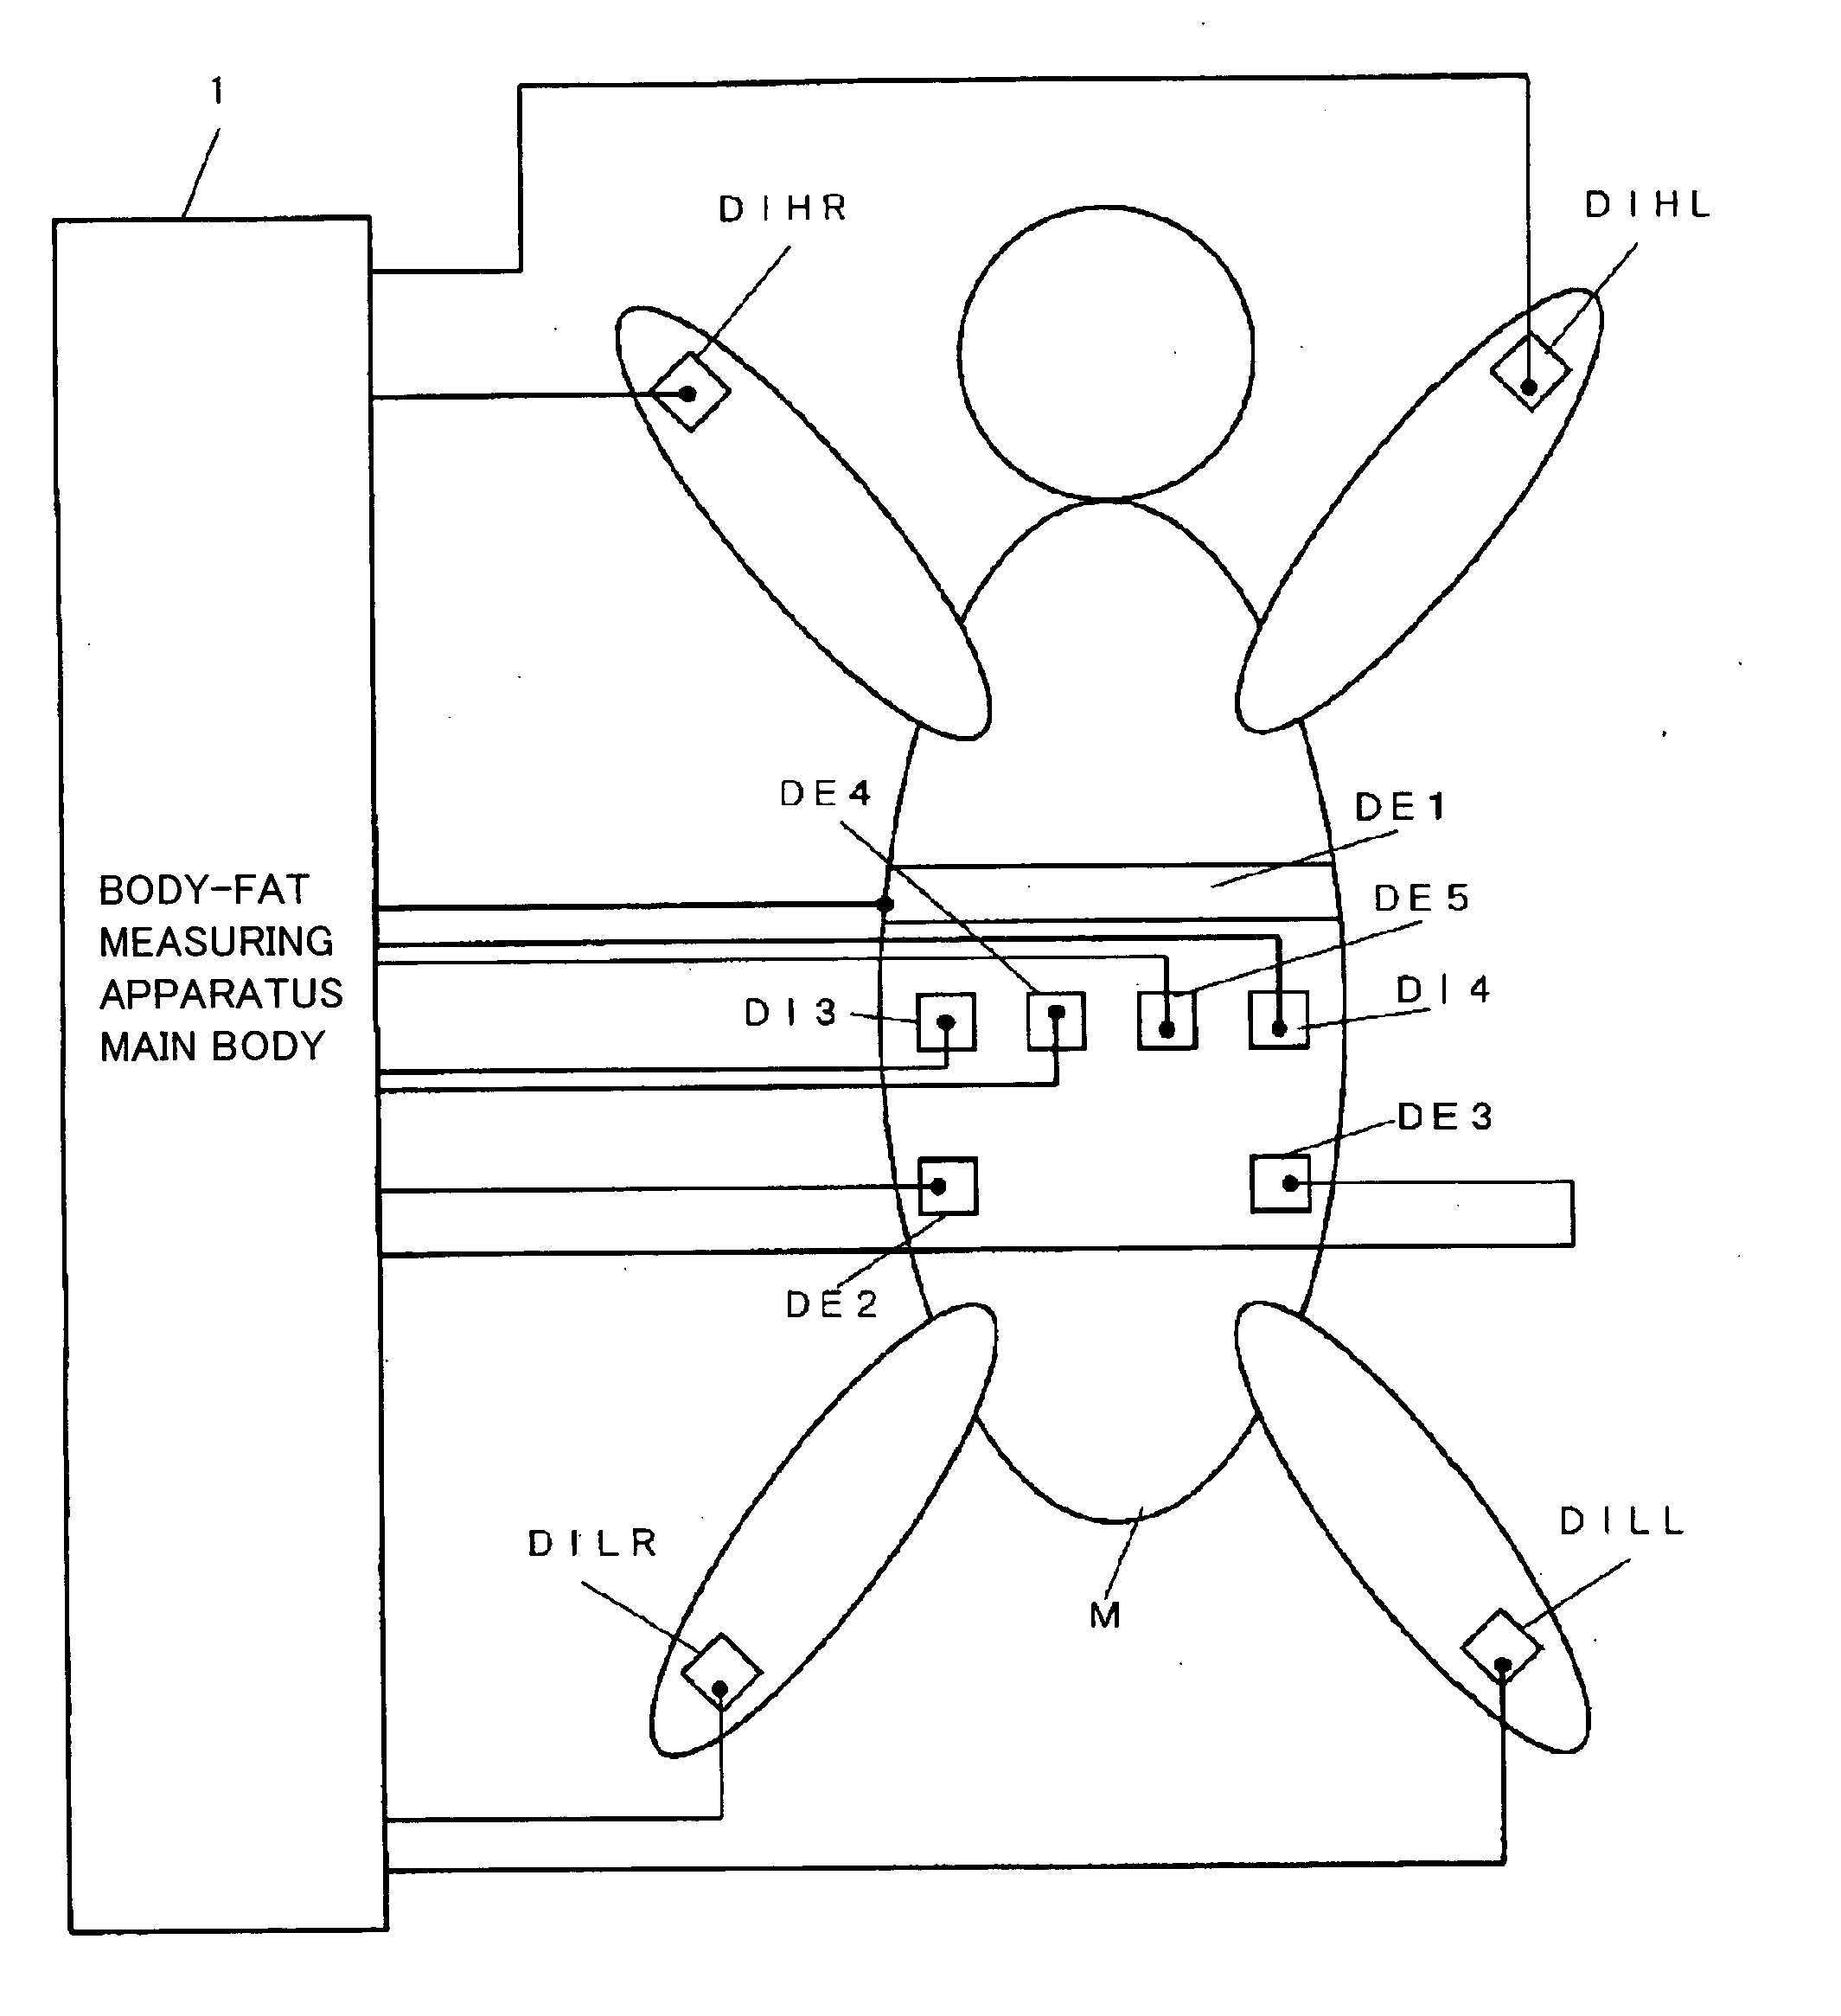 Body fat measuring apparatus capable of measuring visceral fat with high accuracy